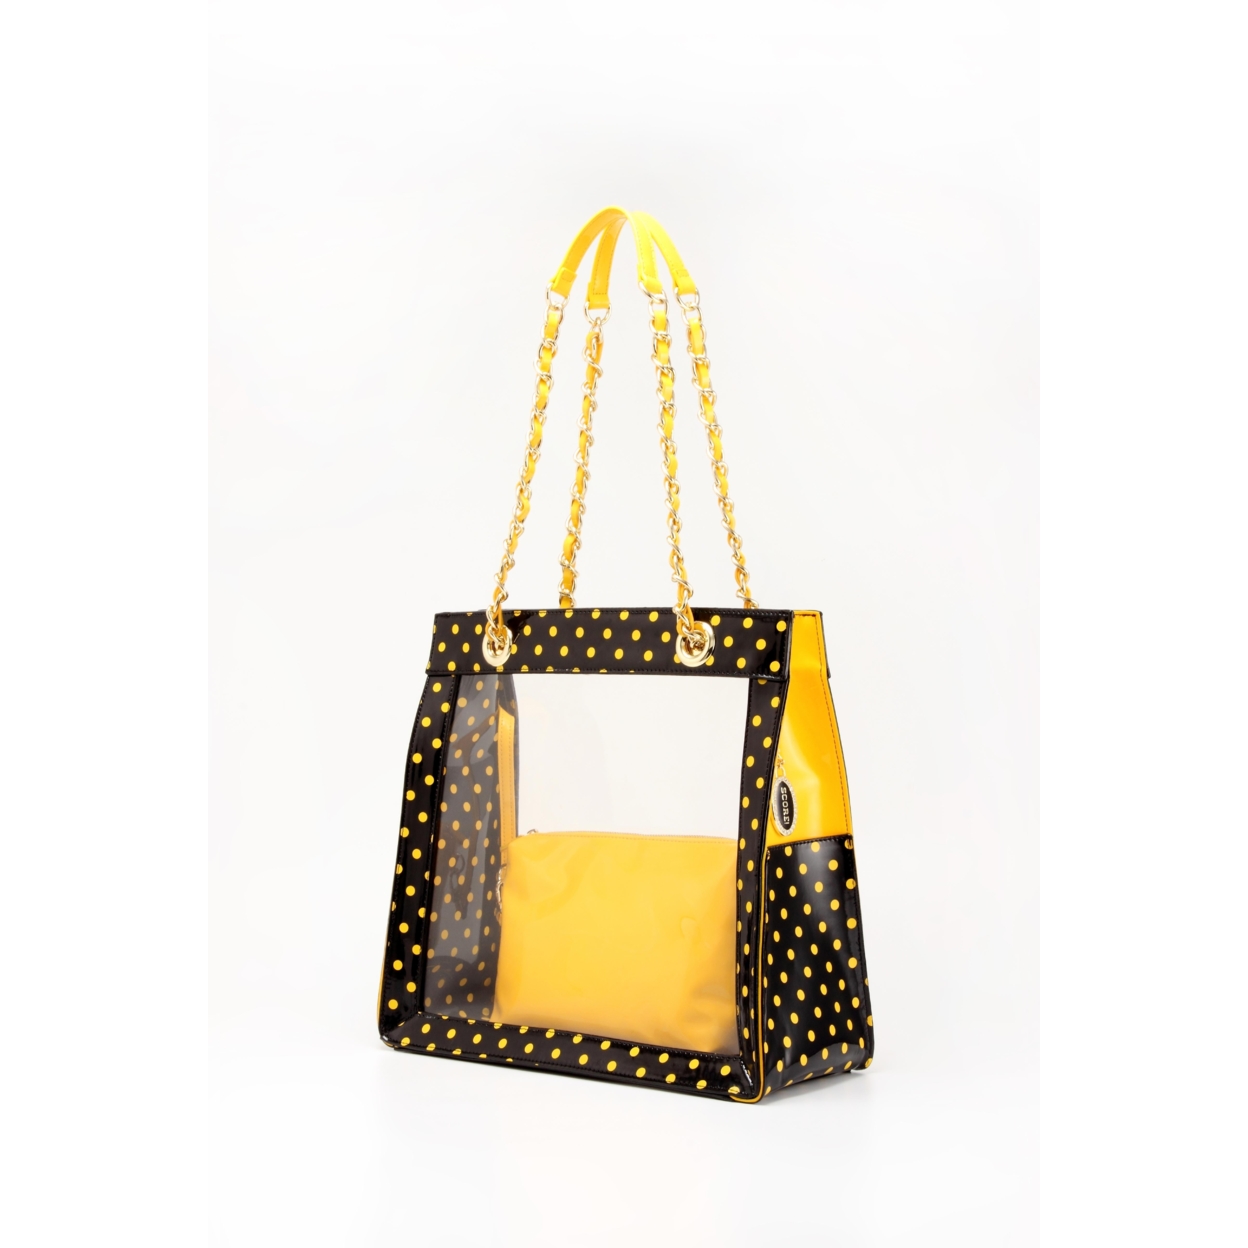 SCORE! Andrea Large Clear Designer Tote For School, Work, Travel - Black And Gold Yellow